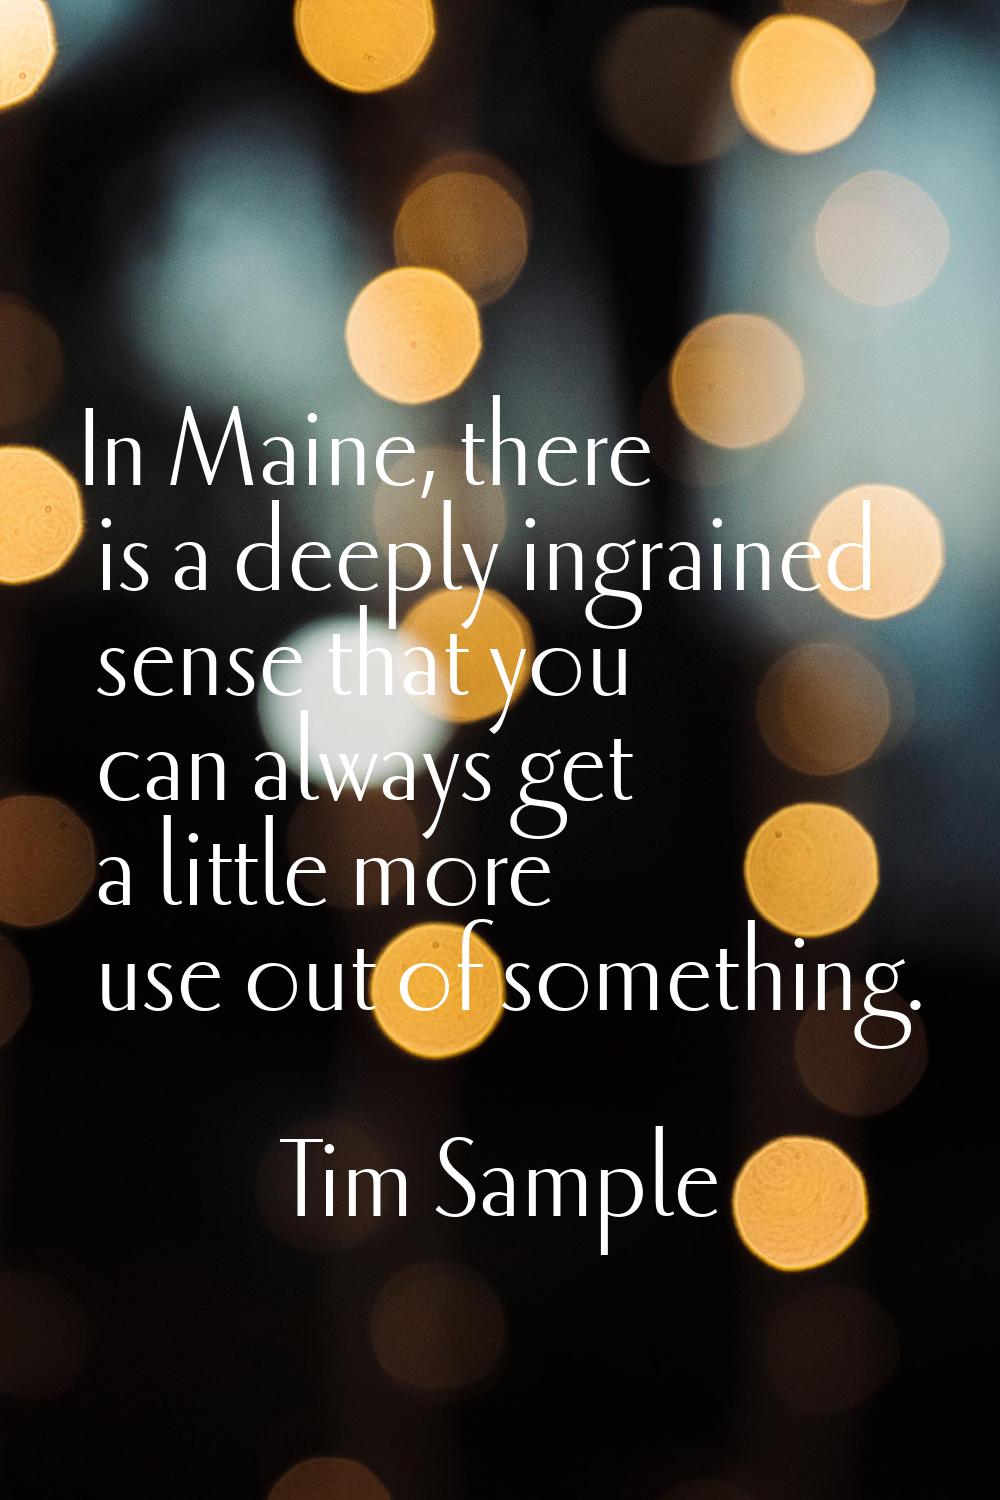 In Maine, there is a deeply ingrained sense that you can always get a little more use out of someth